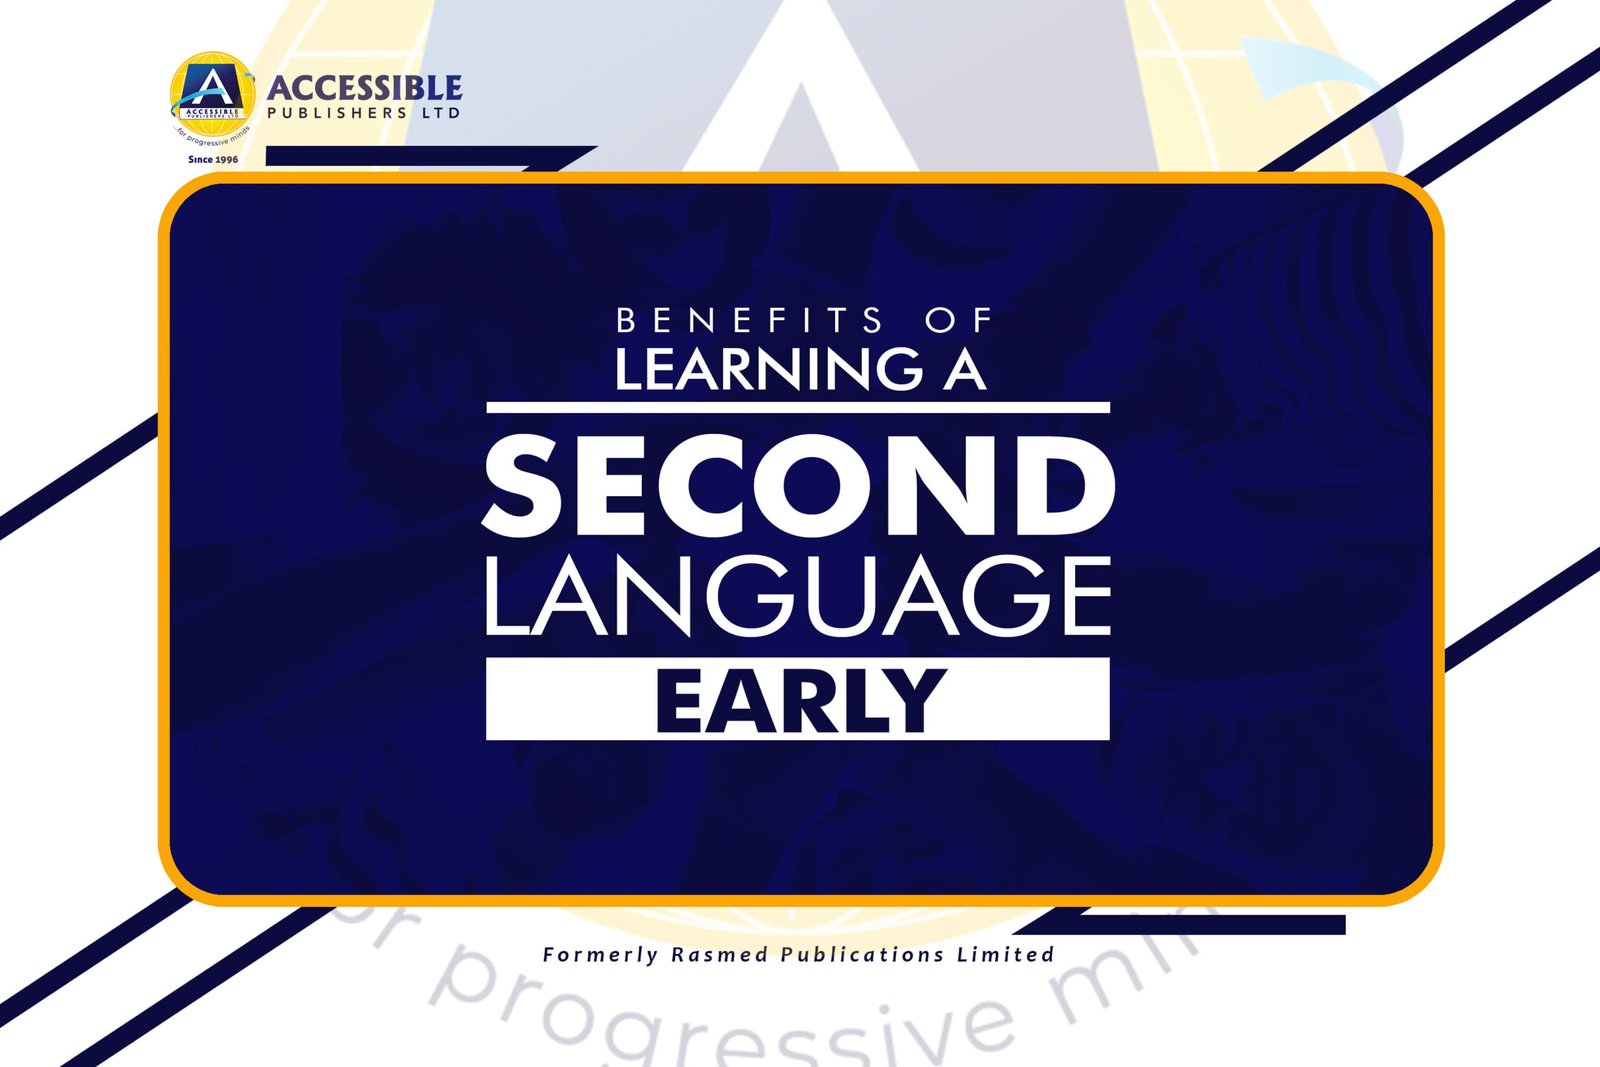 Benefits of Learning a Second Language Early